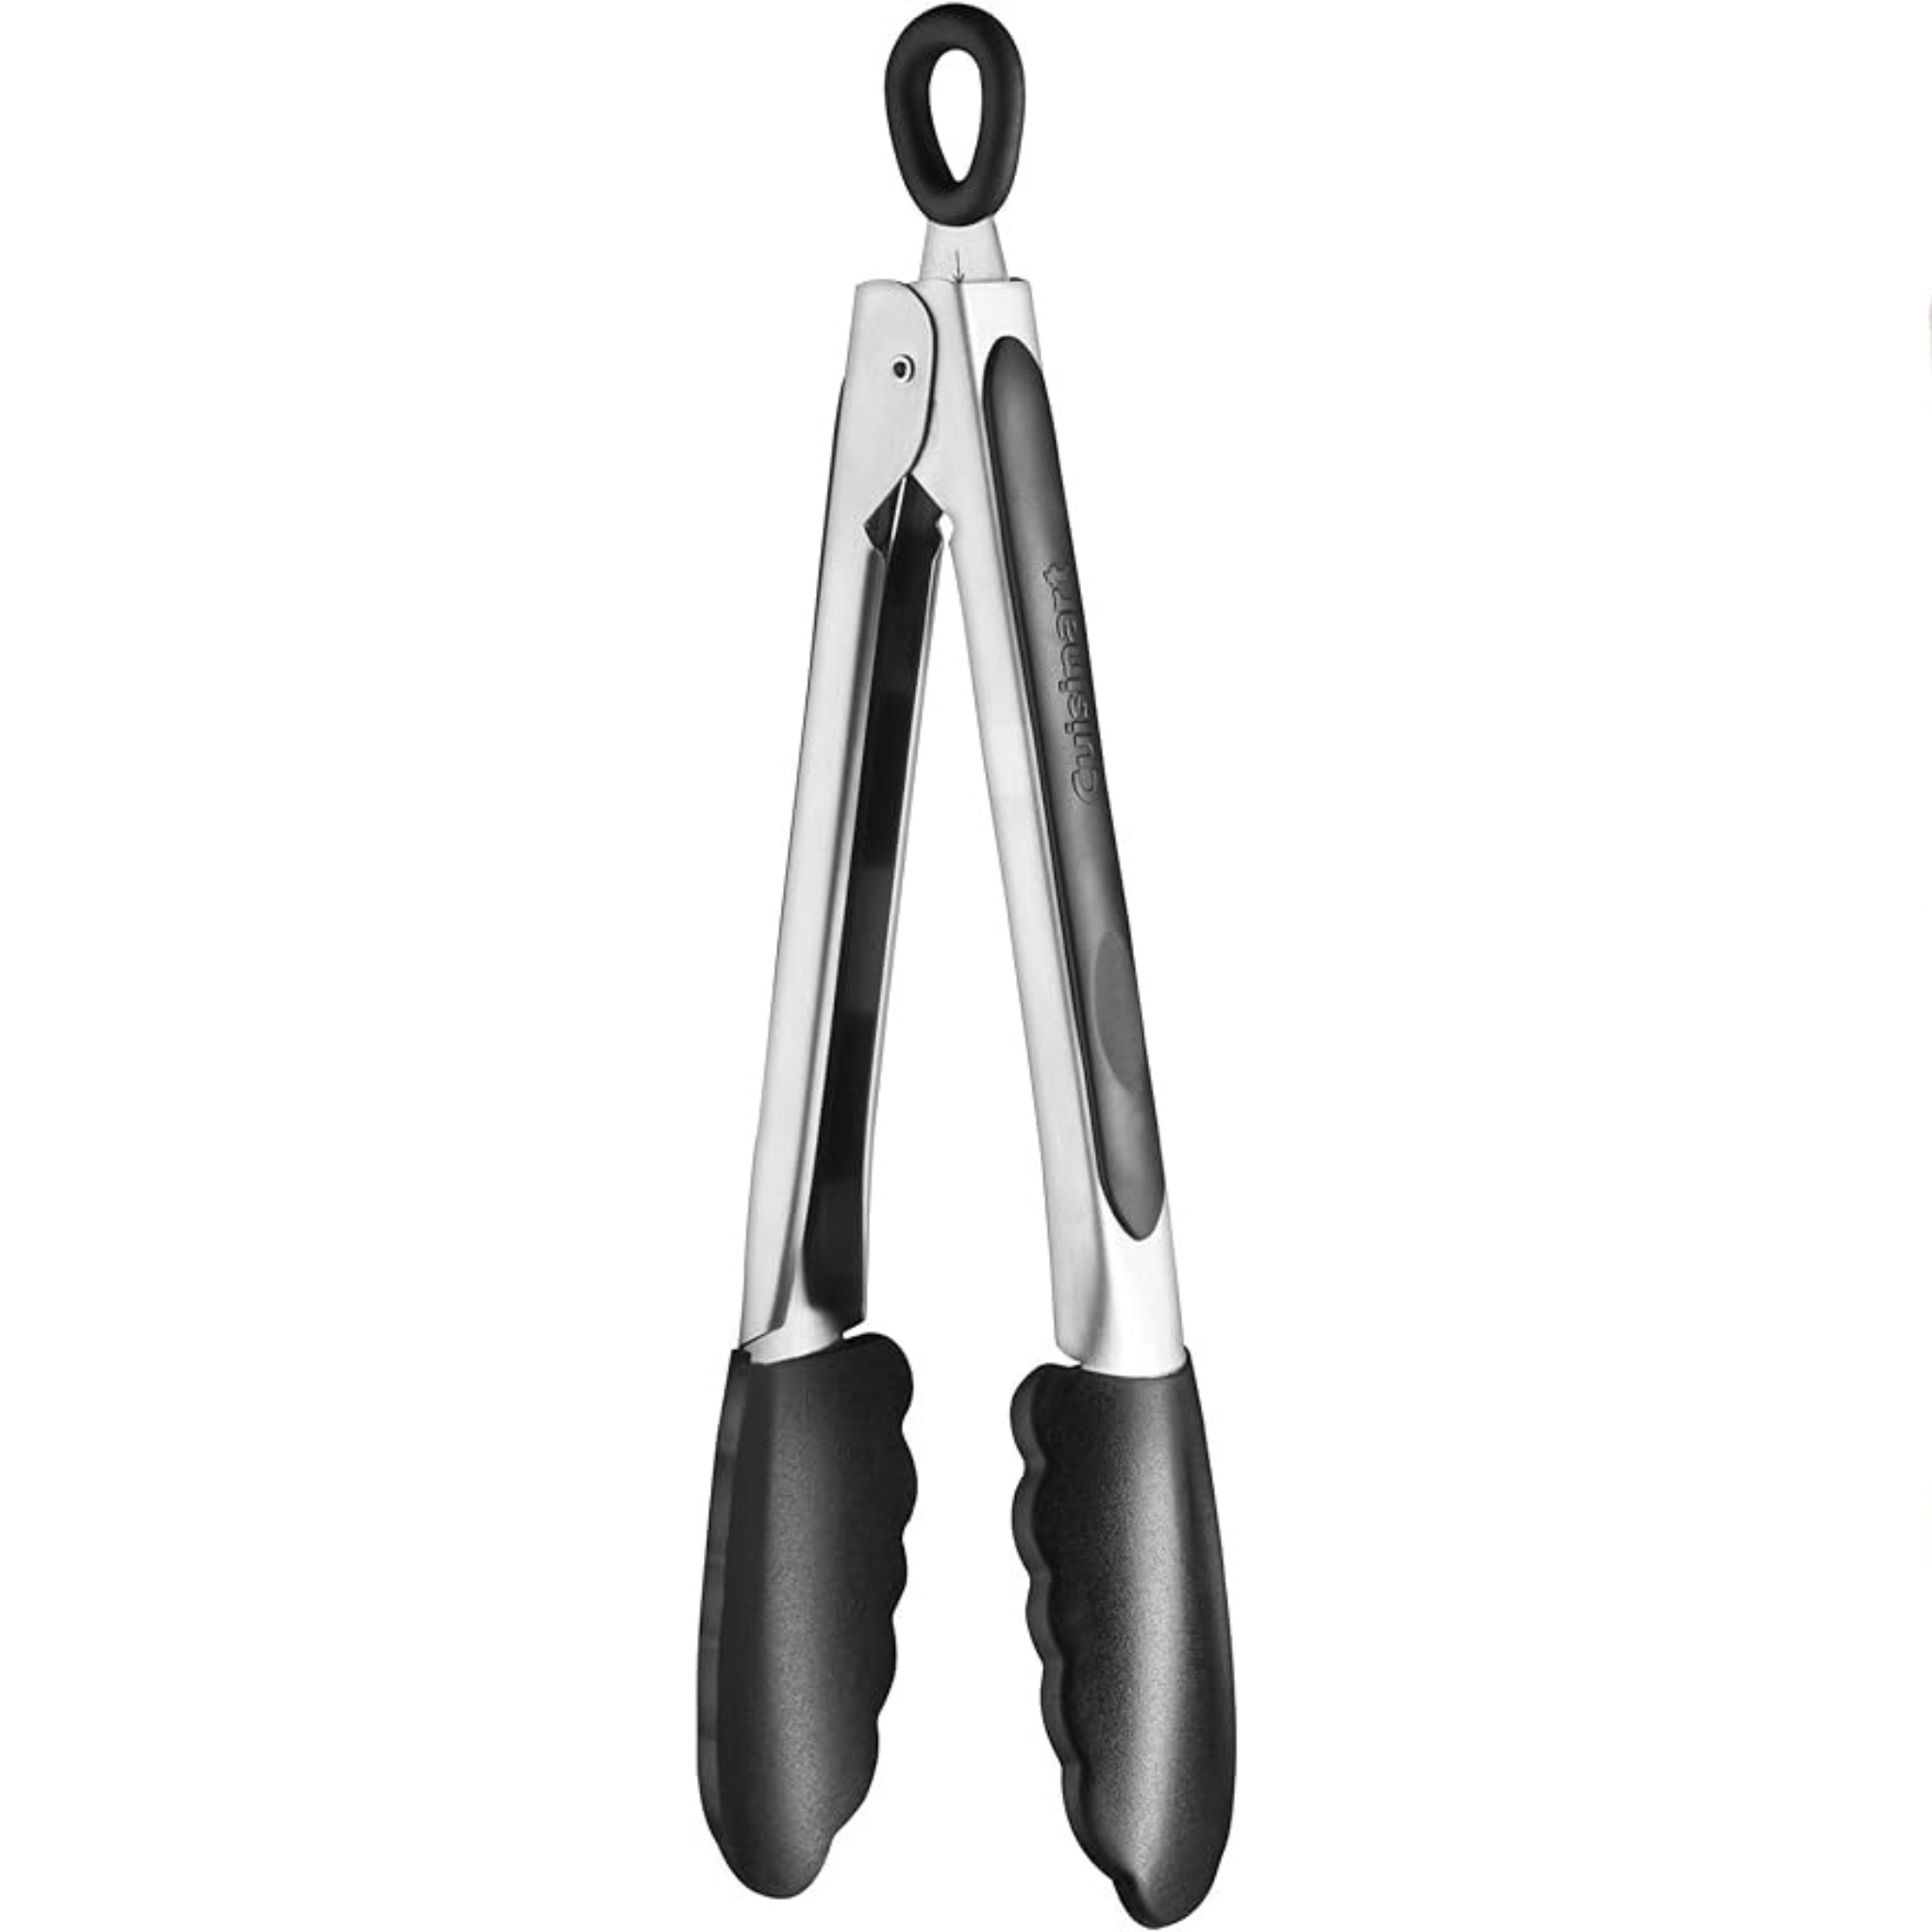 Cuisinart Silicone-Tipped 9-Inch Tongs